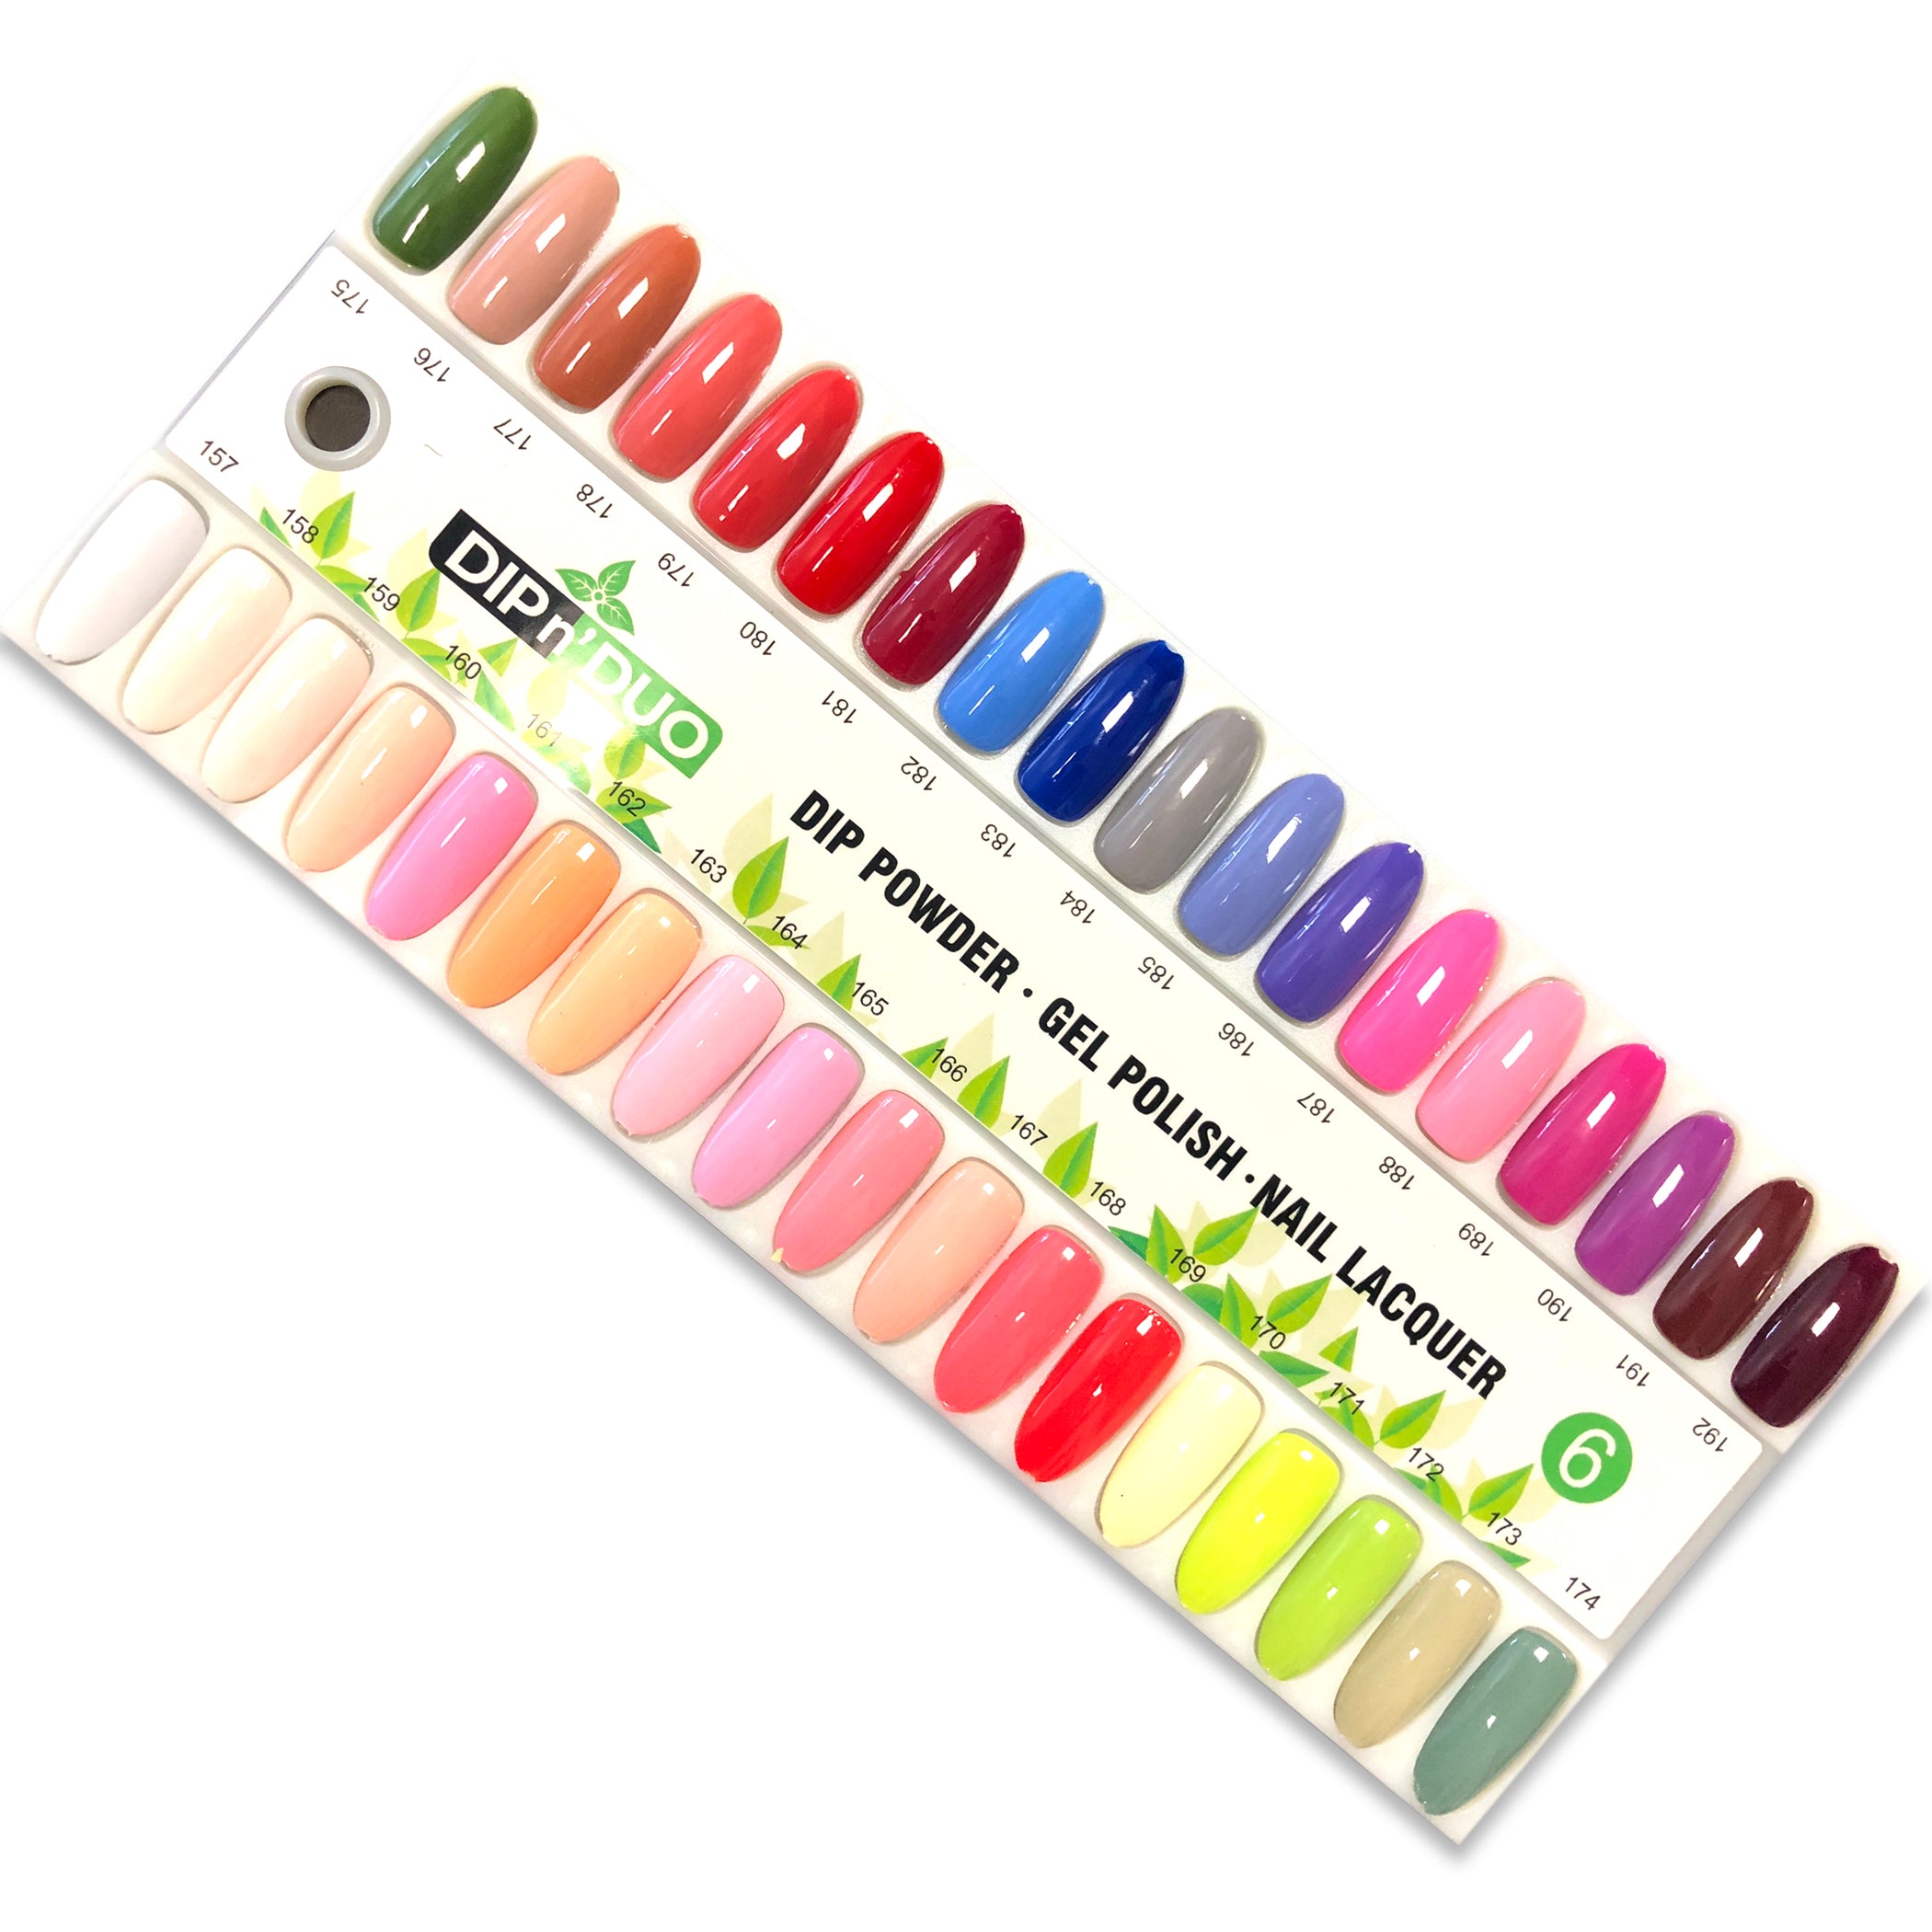 DIP n' DUO Sample/Color Chart Optional — Nailsjobs by Zurno